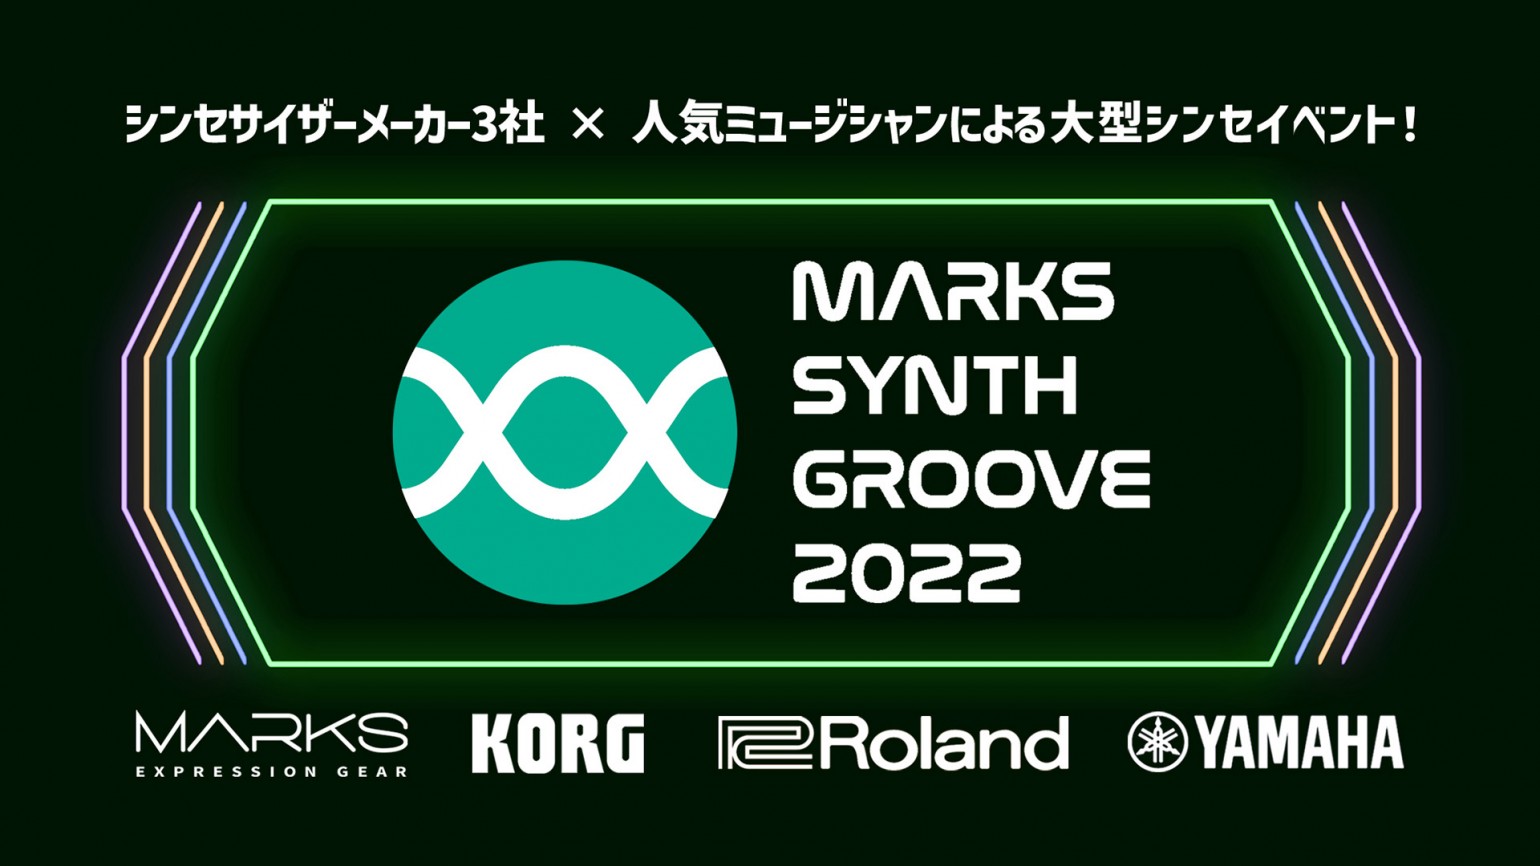 Marks Synth Groove 2022